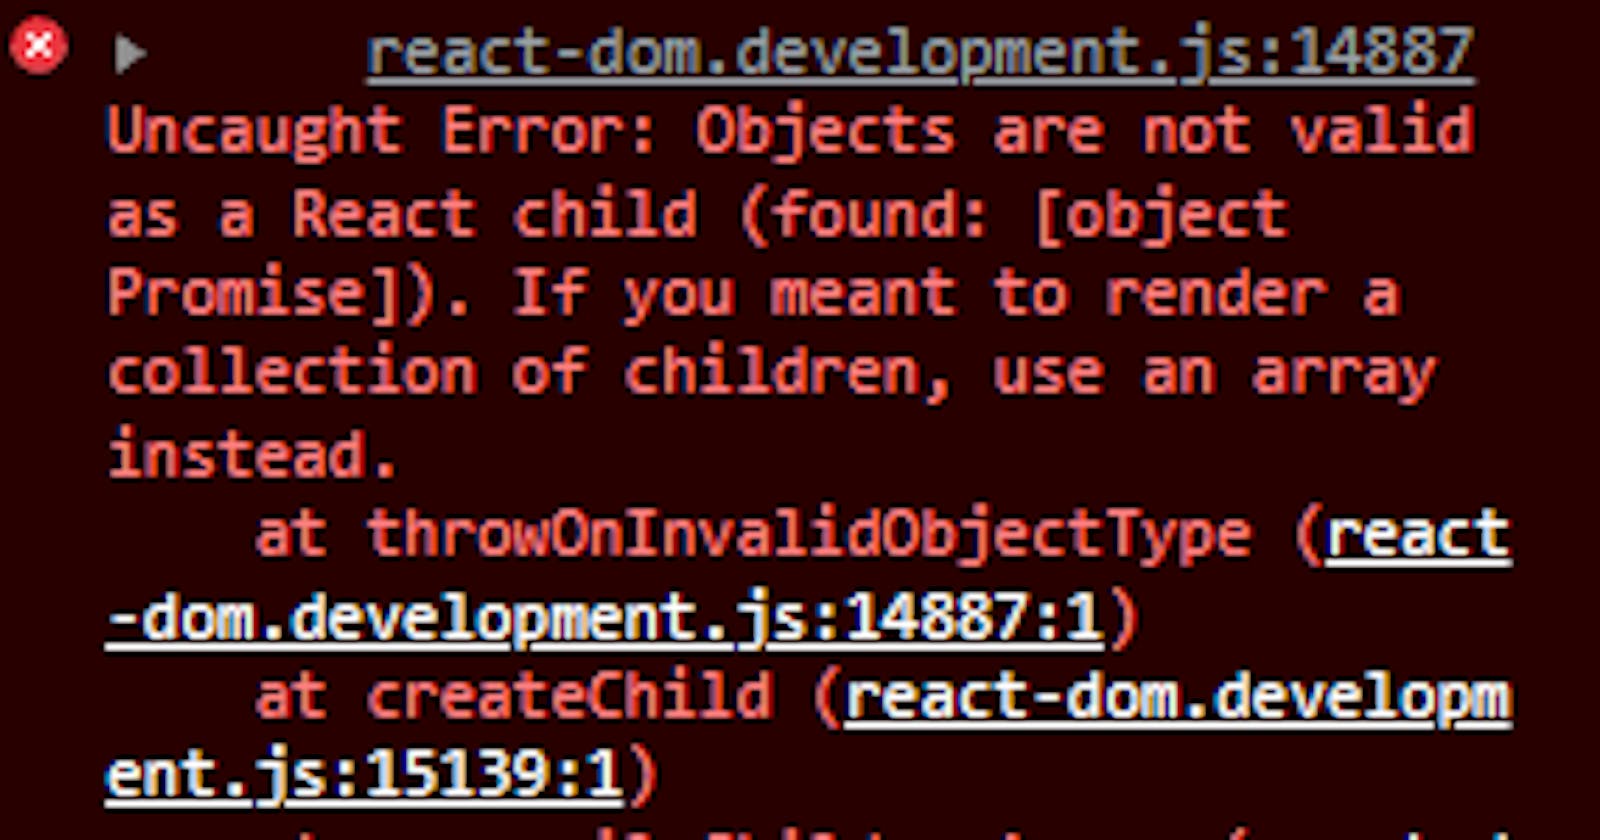 How I Fix "Error: Objects are not valid as a React child (found: [object Promise])